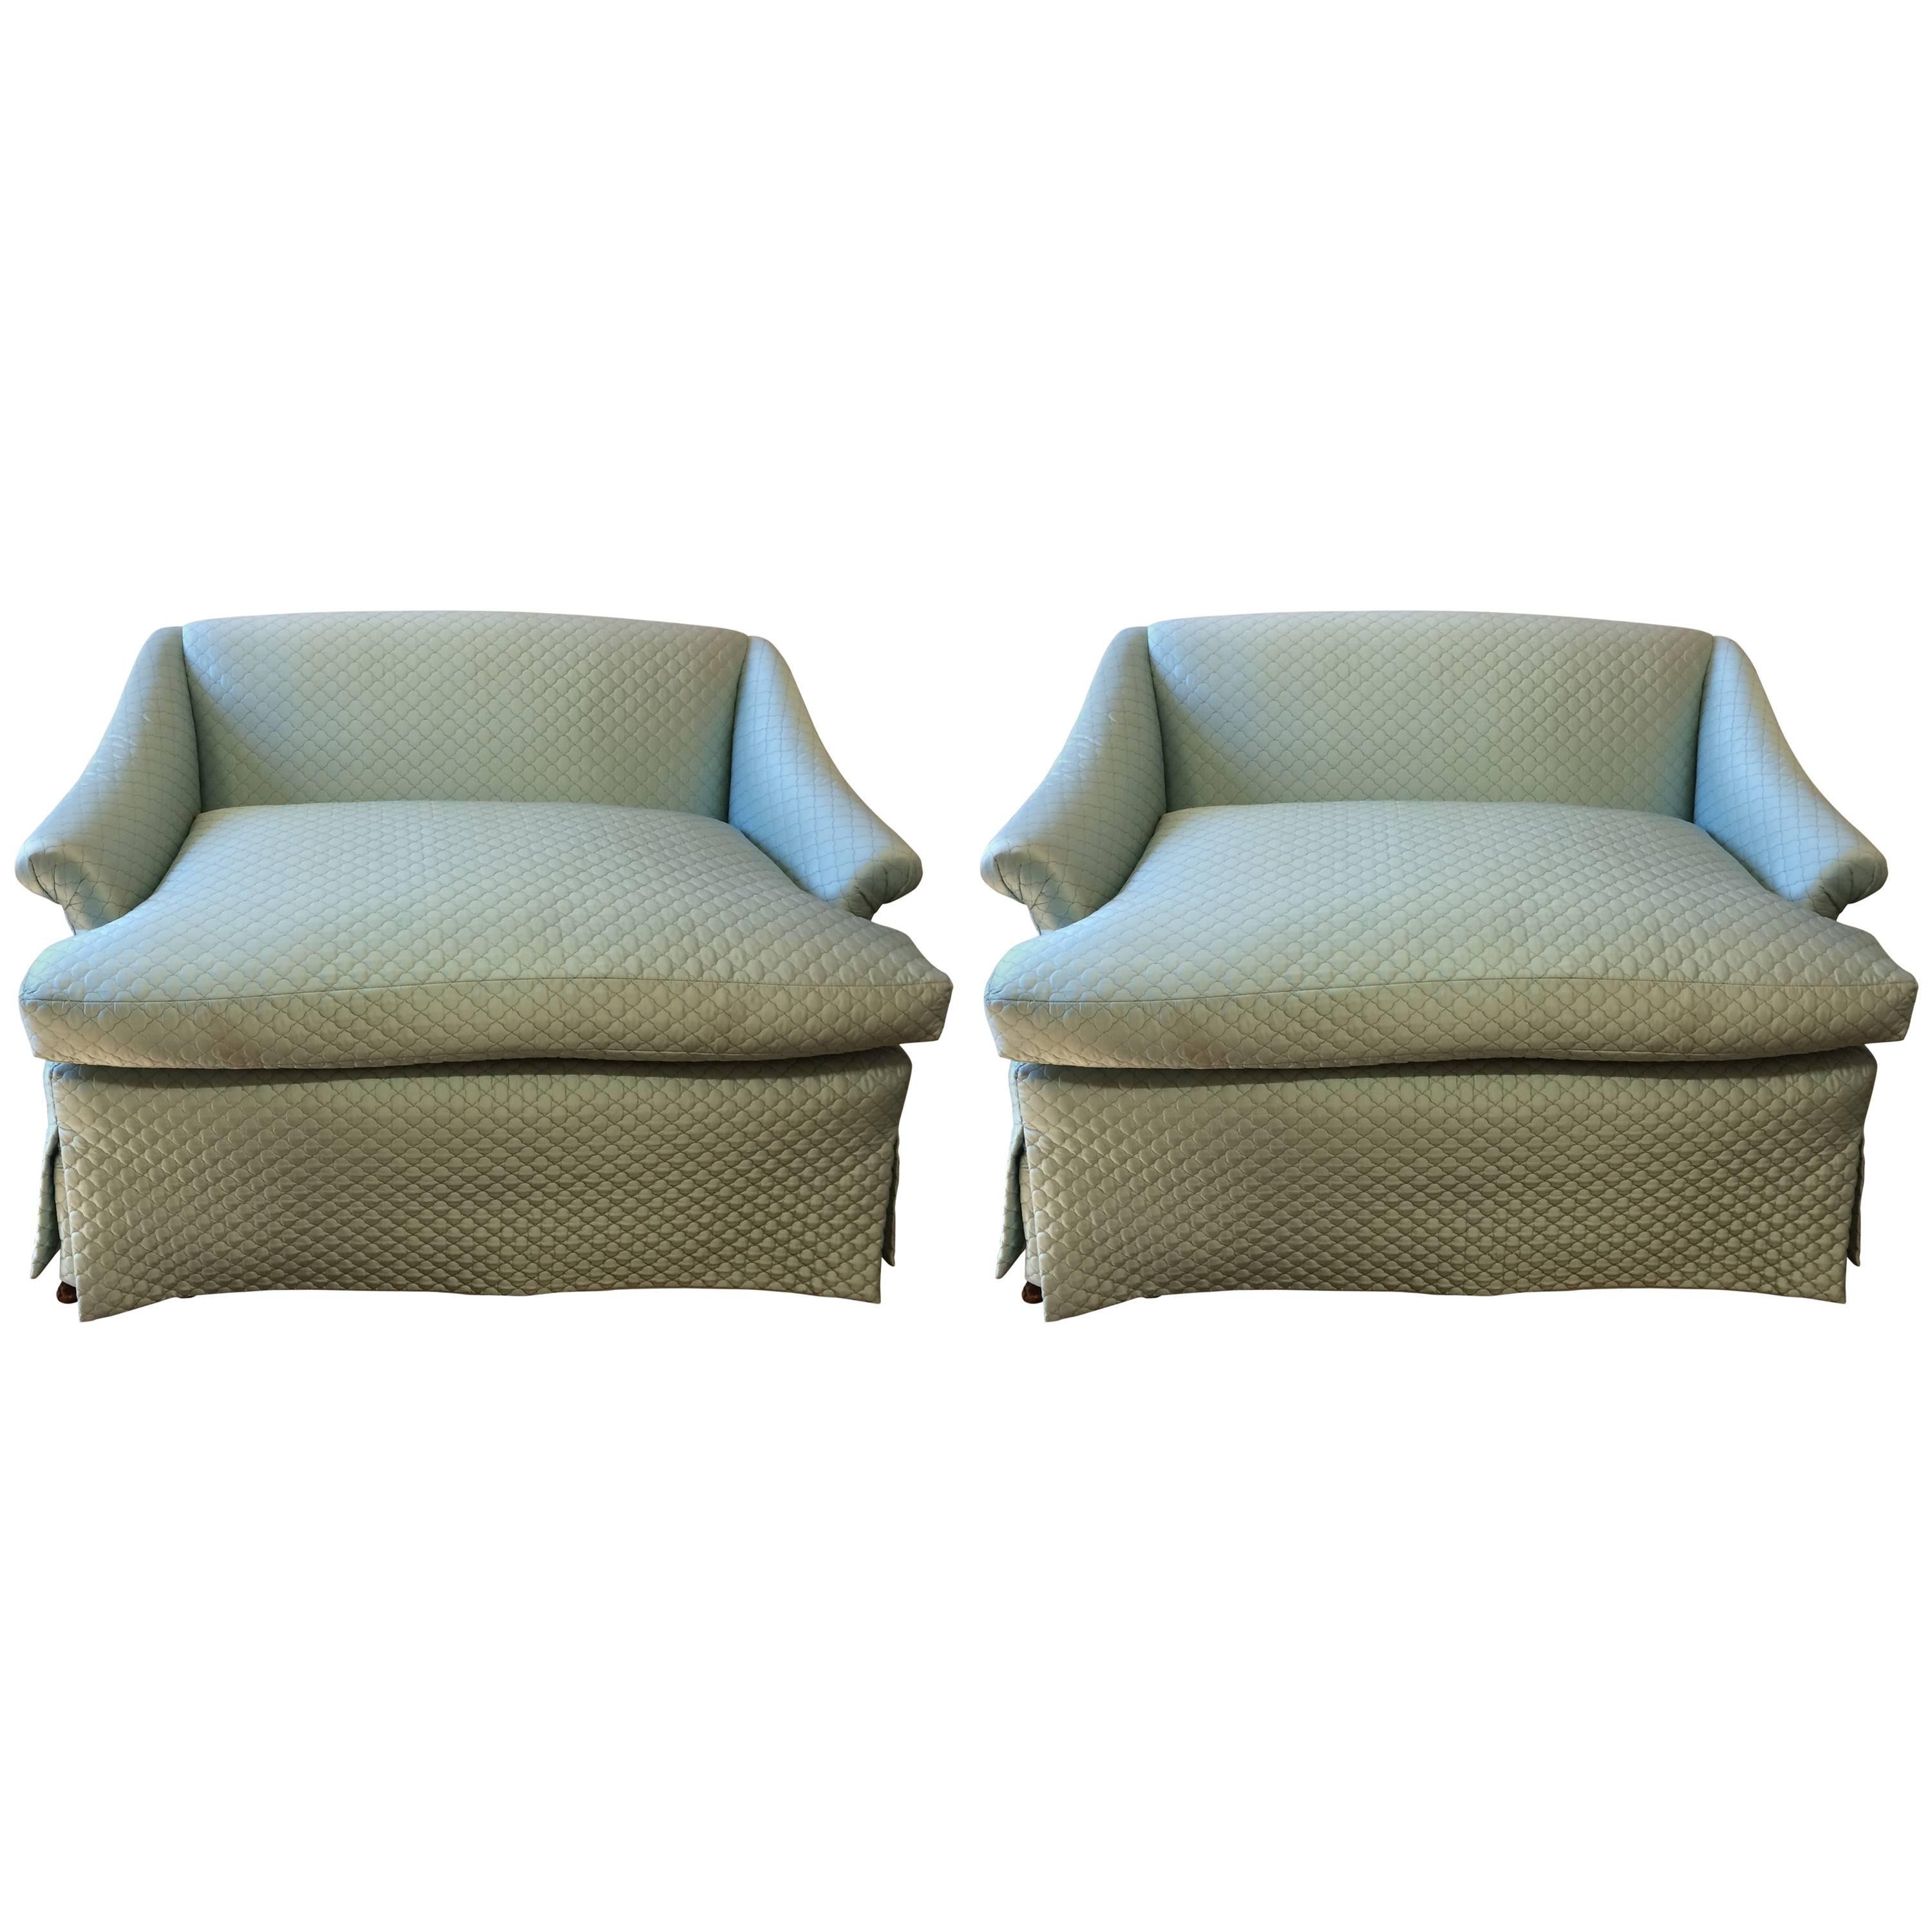 Movie Star Glam Pair of Tiffany Blue Silk Quilted Antique Loveseats Settees